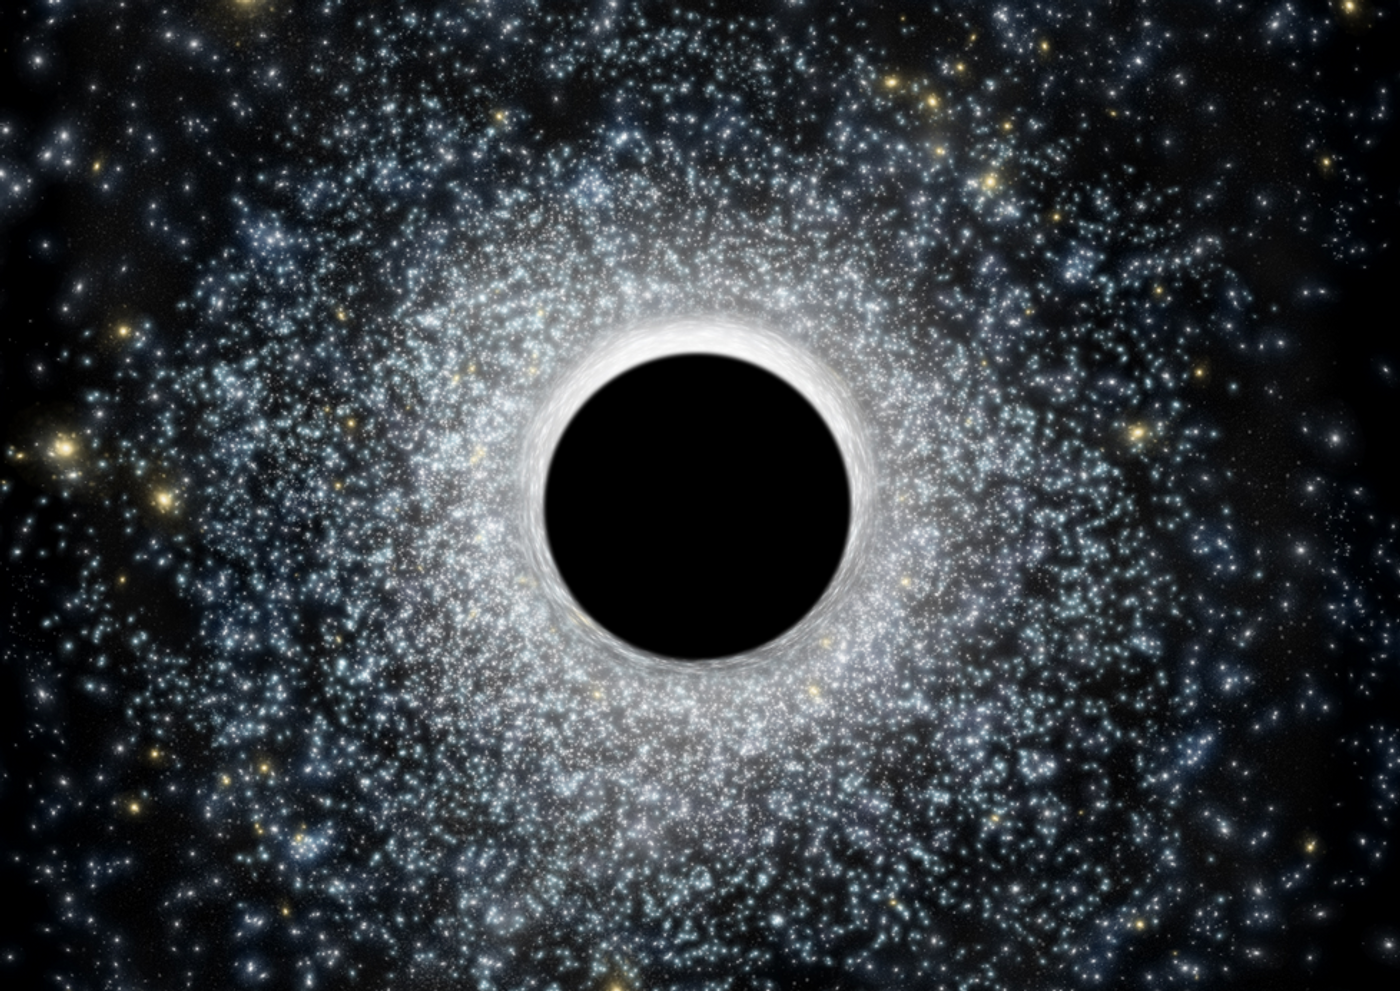 An artist's impression of a 'middleweight' black hole at the center of a star cluster.